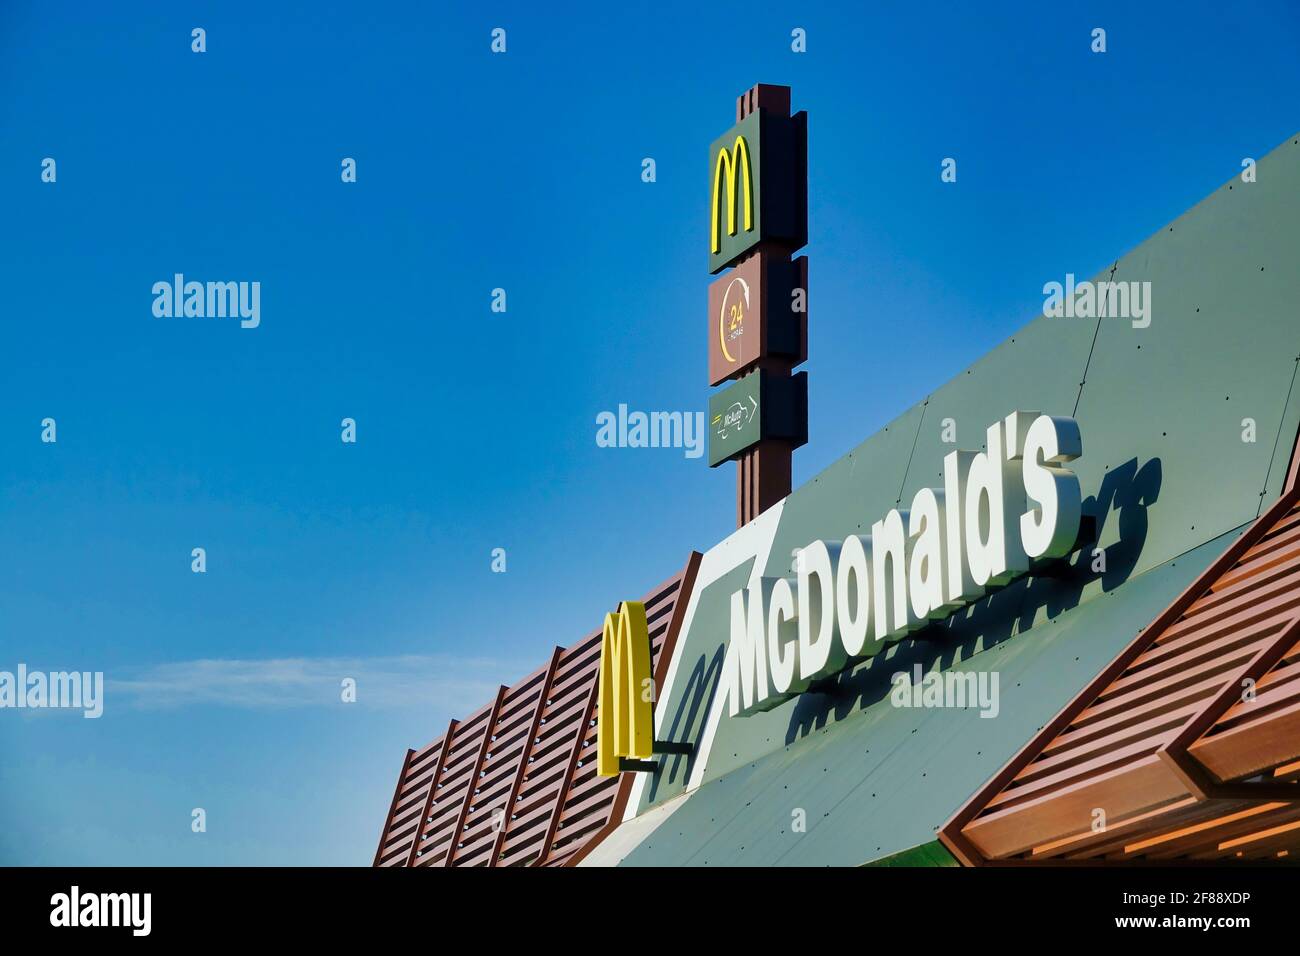 Exterior views of a restaurant of a famous American fast food company in Granada (Spain) on a sunny spring morning Stock Photo